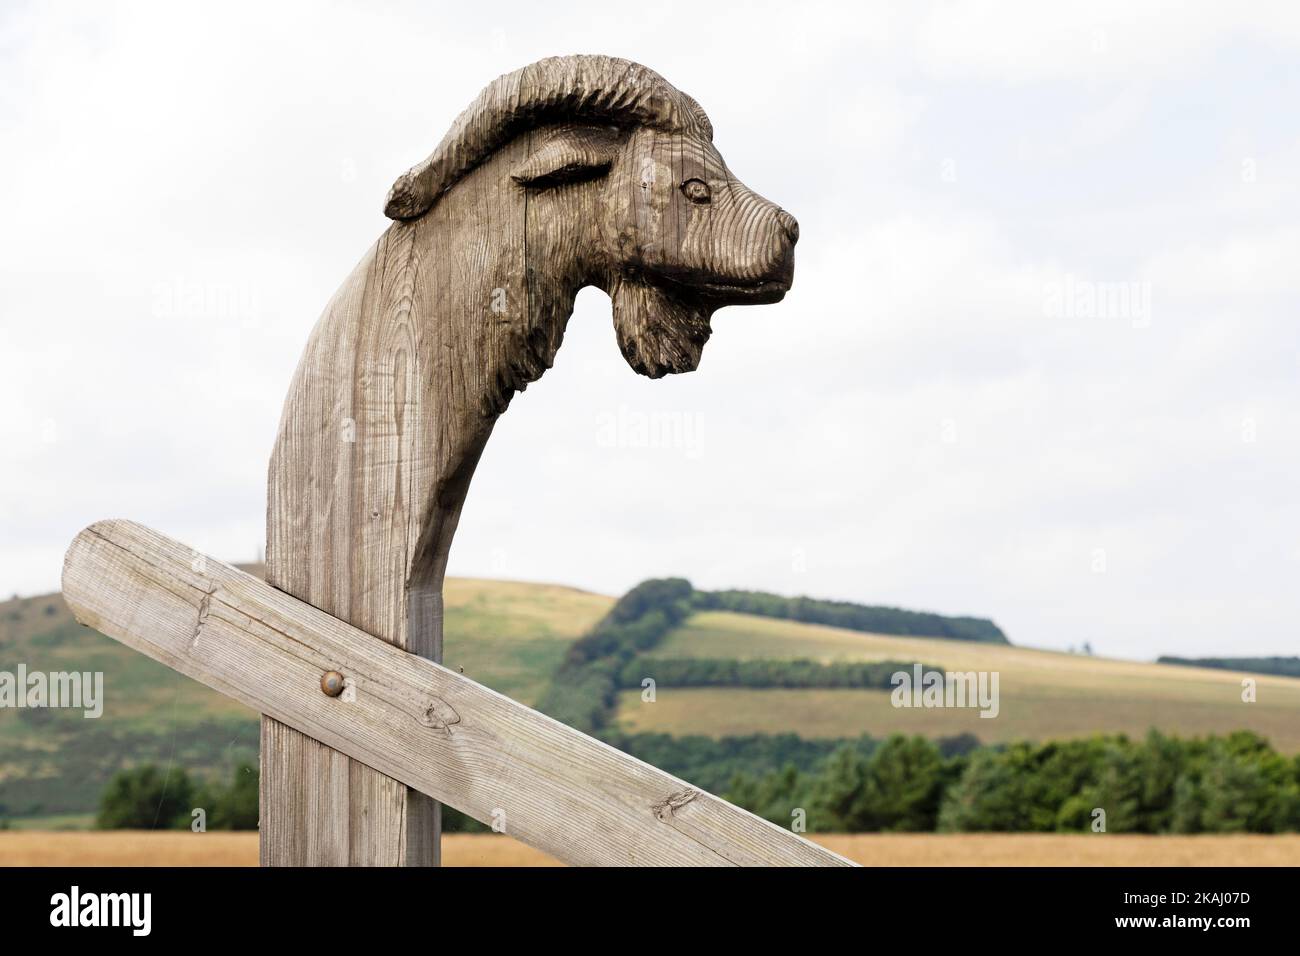 An Anglo-Saxon-style wooden pillar topped by the carving of a beast at Yeavering near Wooler, Northumberland. During the 7th century the pwerful royal Stock Photo